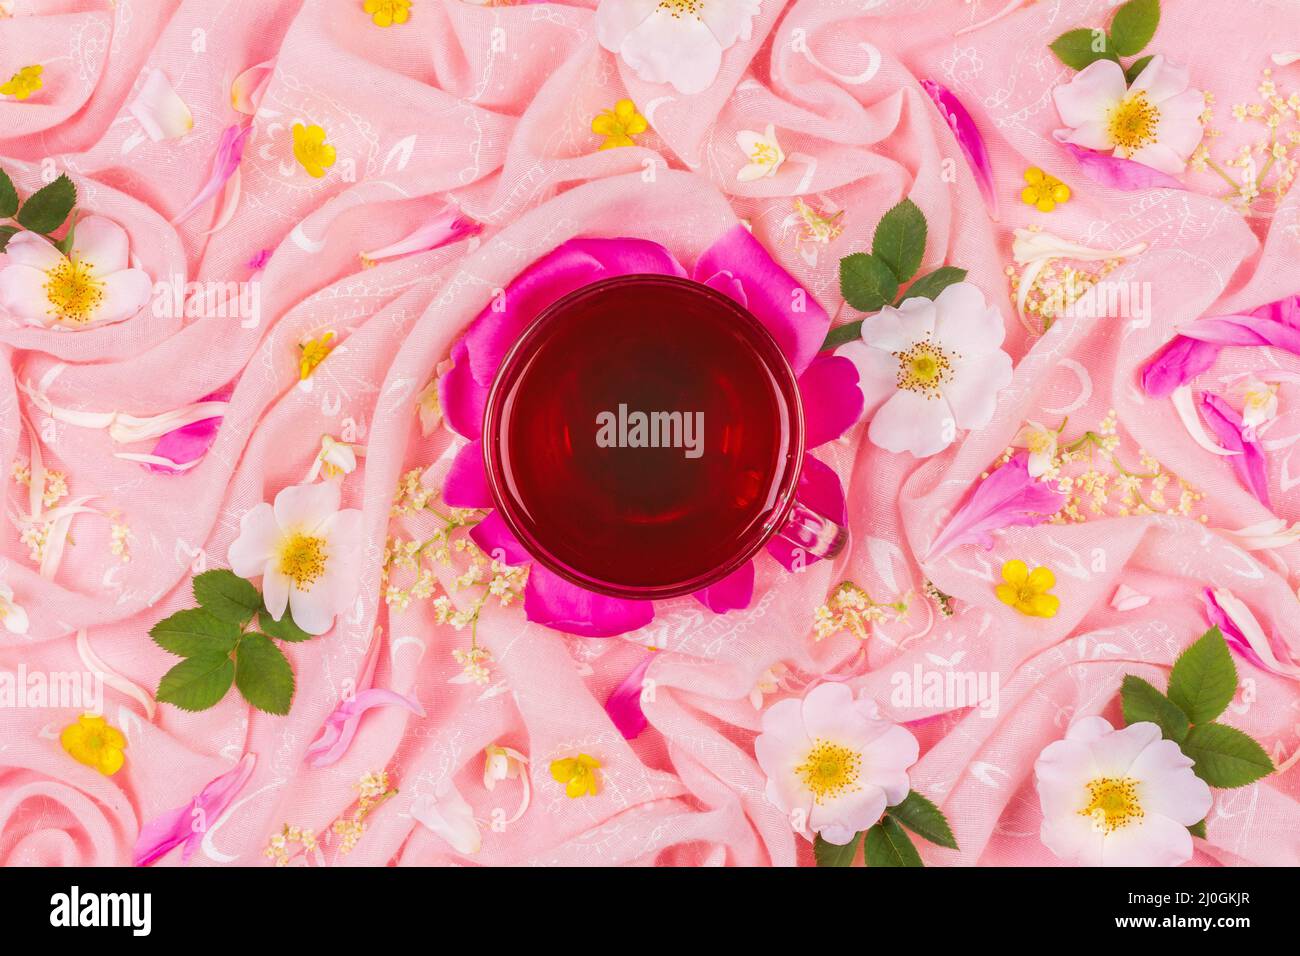 A cup of tea on a background of pink fabric in pink rose flowers Stock Photo